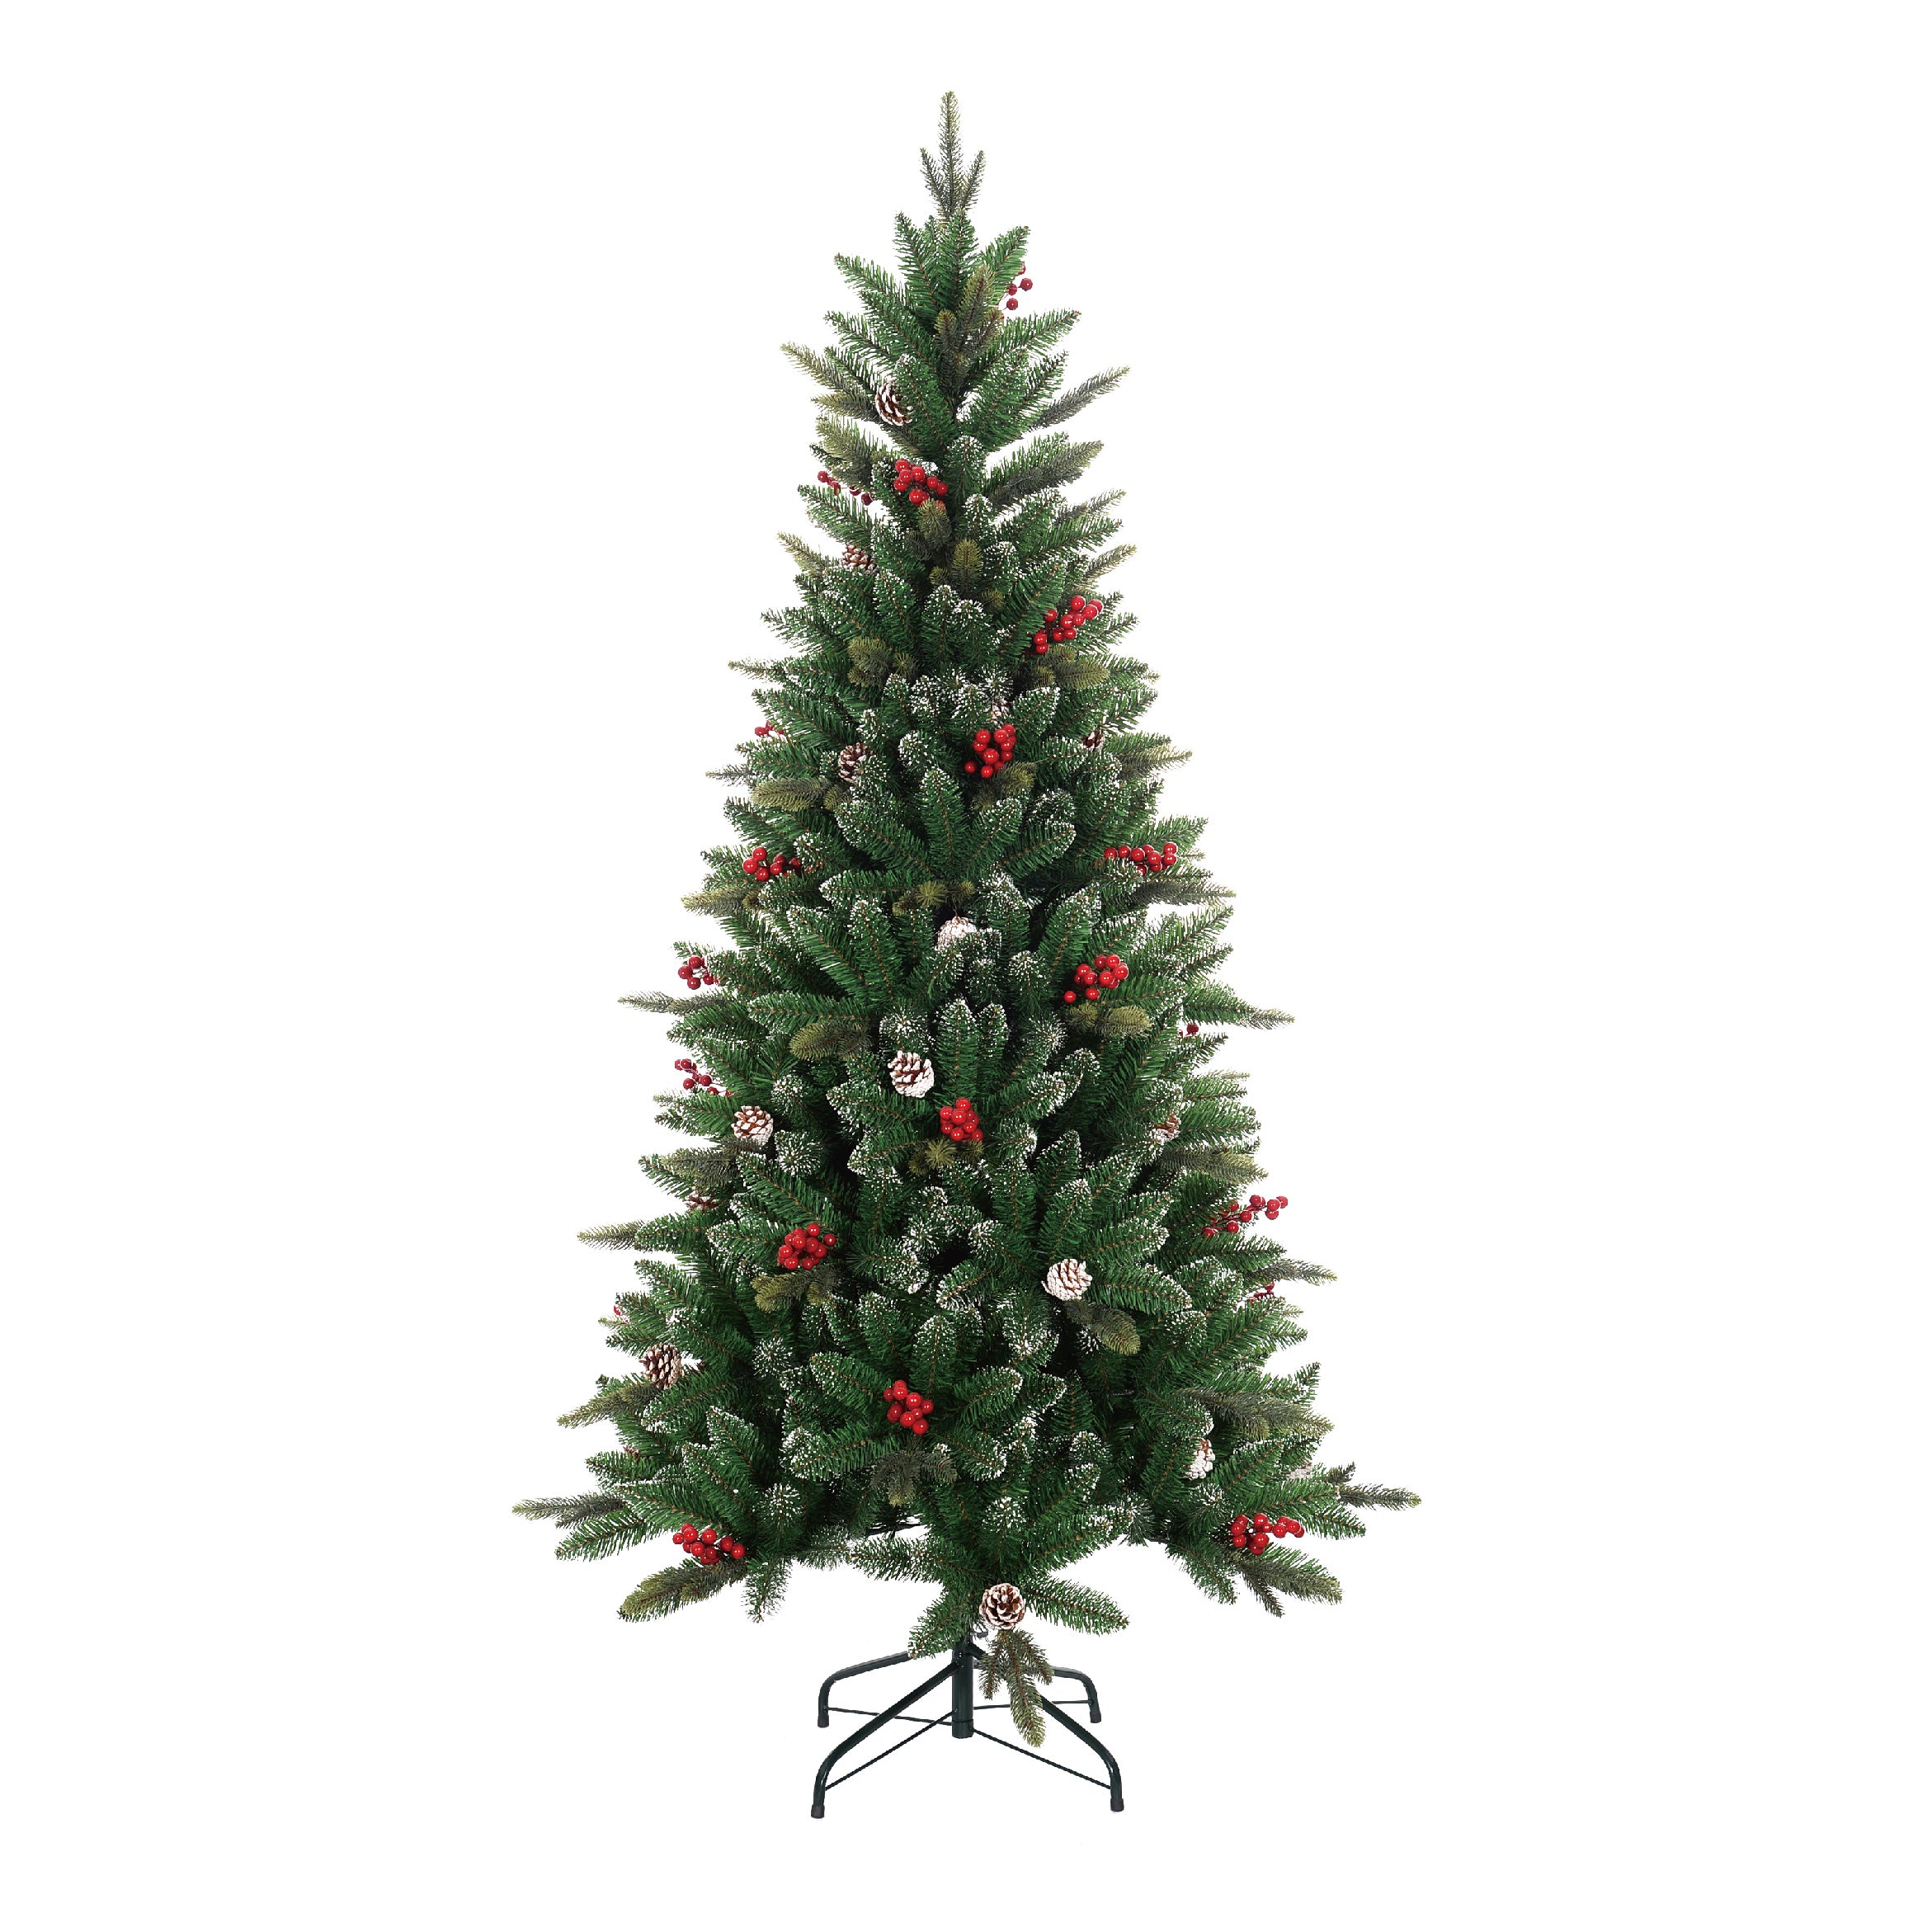 Christmas Sparkle Artificial Christmas Tree with Pinecones & Berries 6ft 1.8m - TJ Hughes